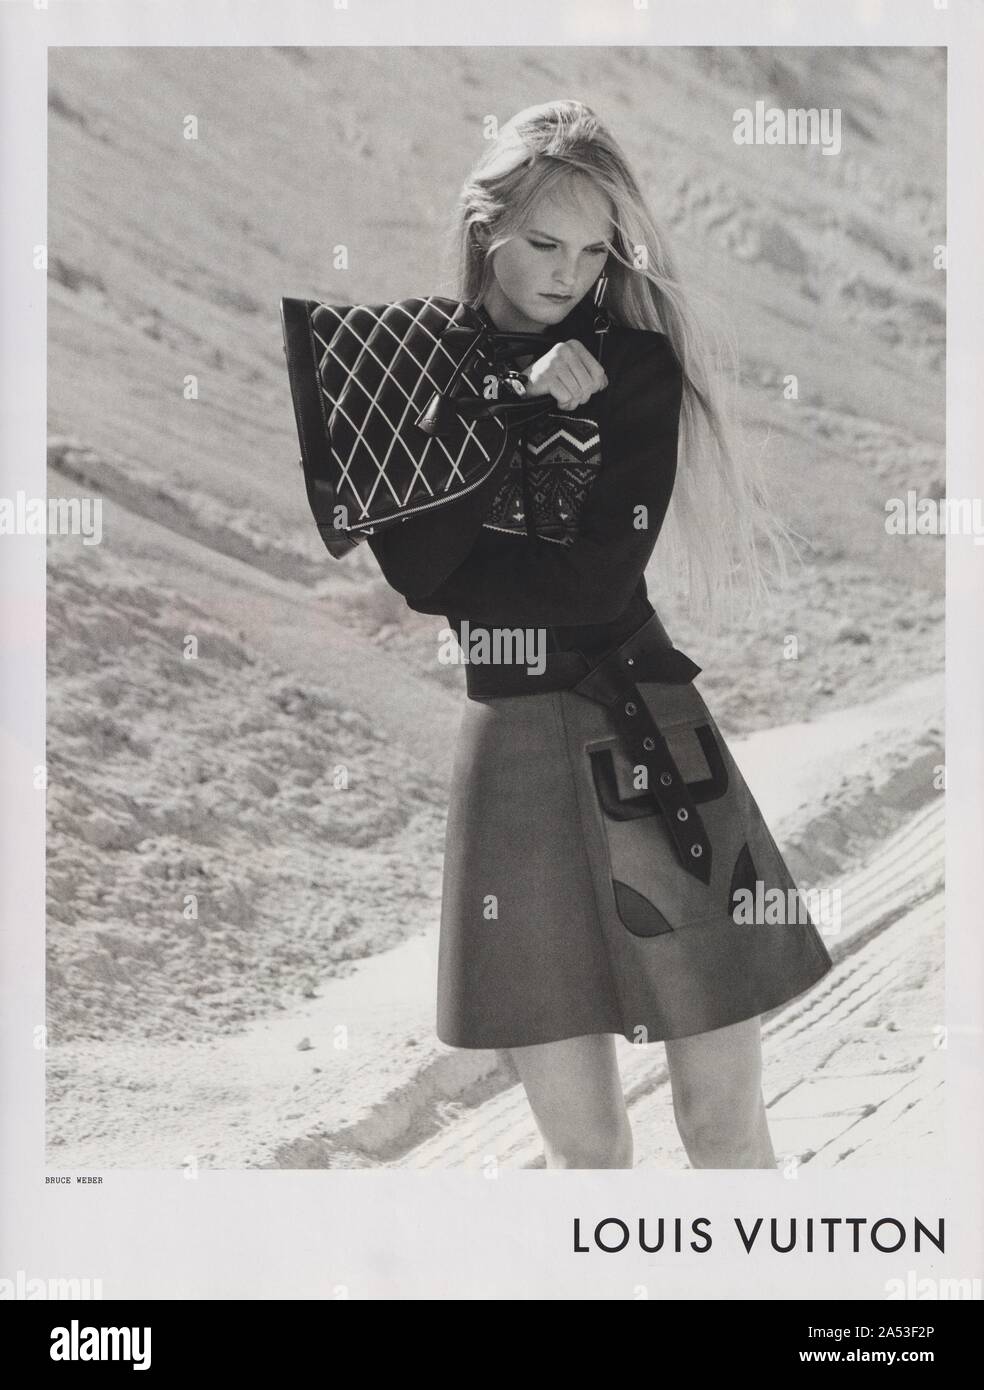 poster advertising Louis Vuitton with Jean Campbell in paper